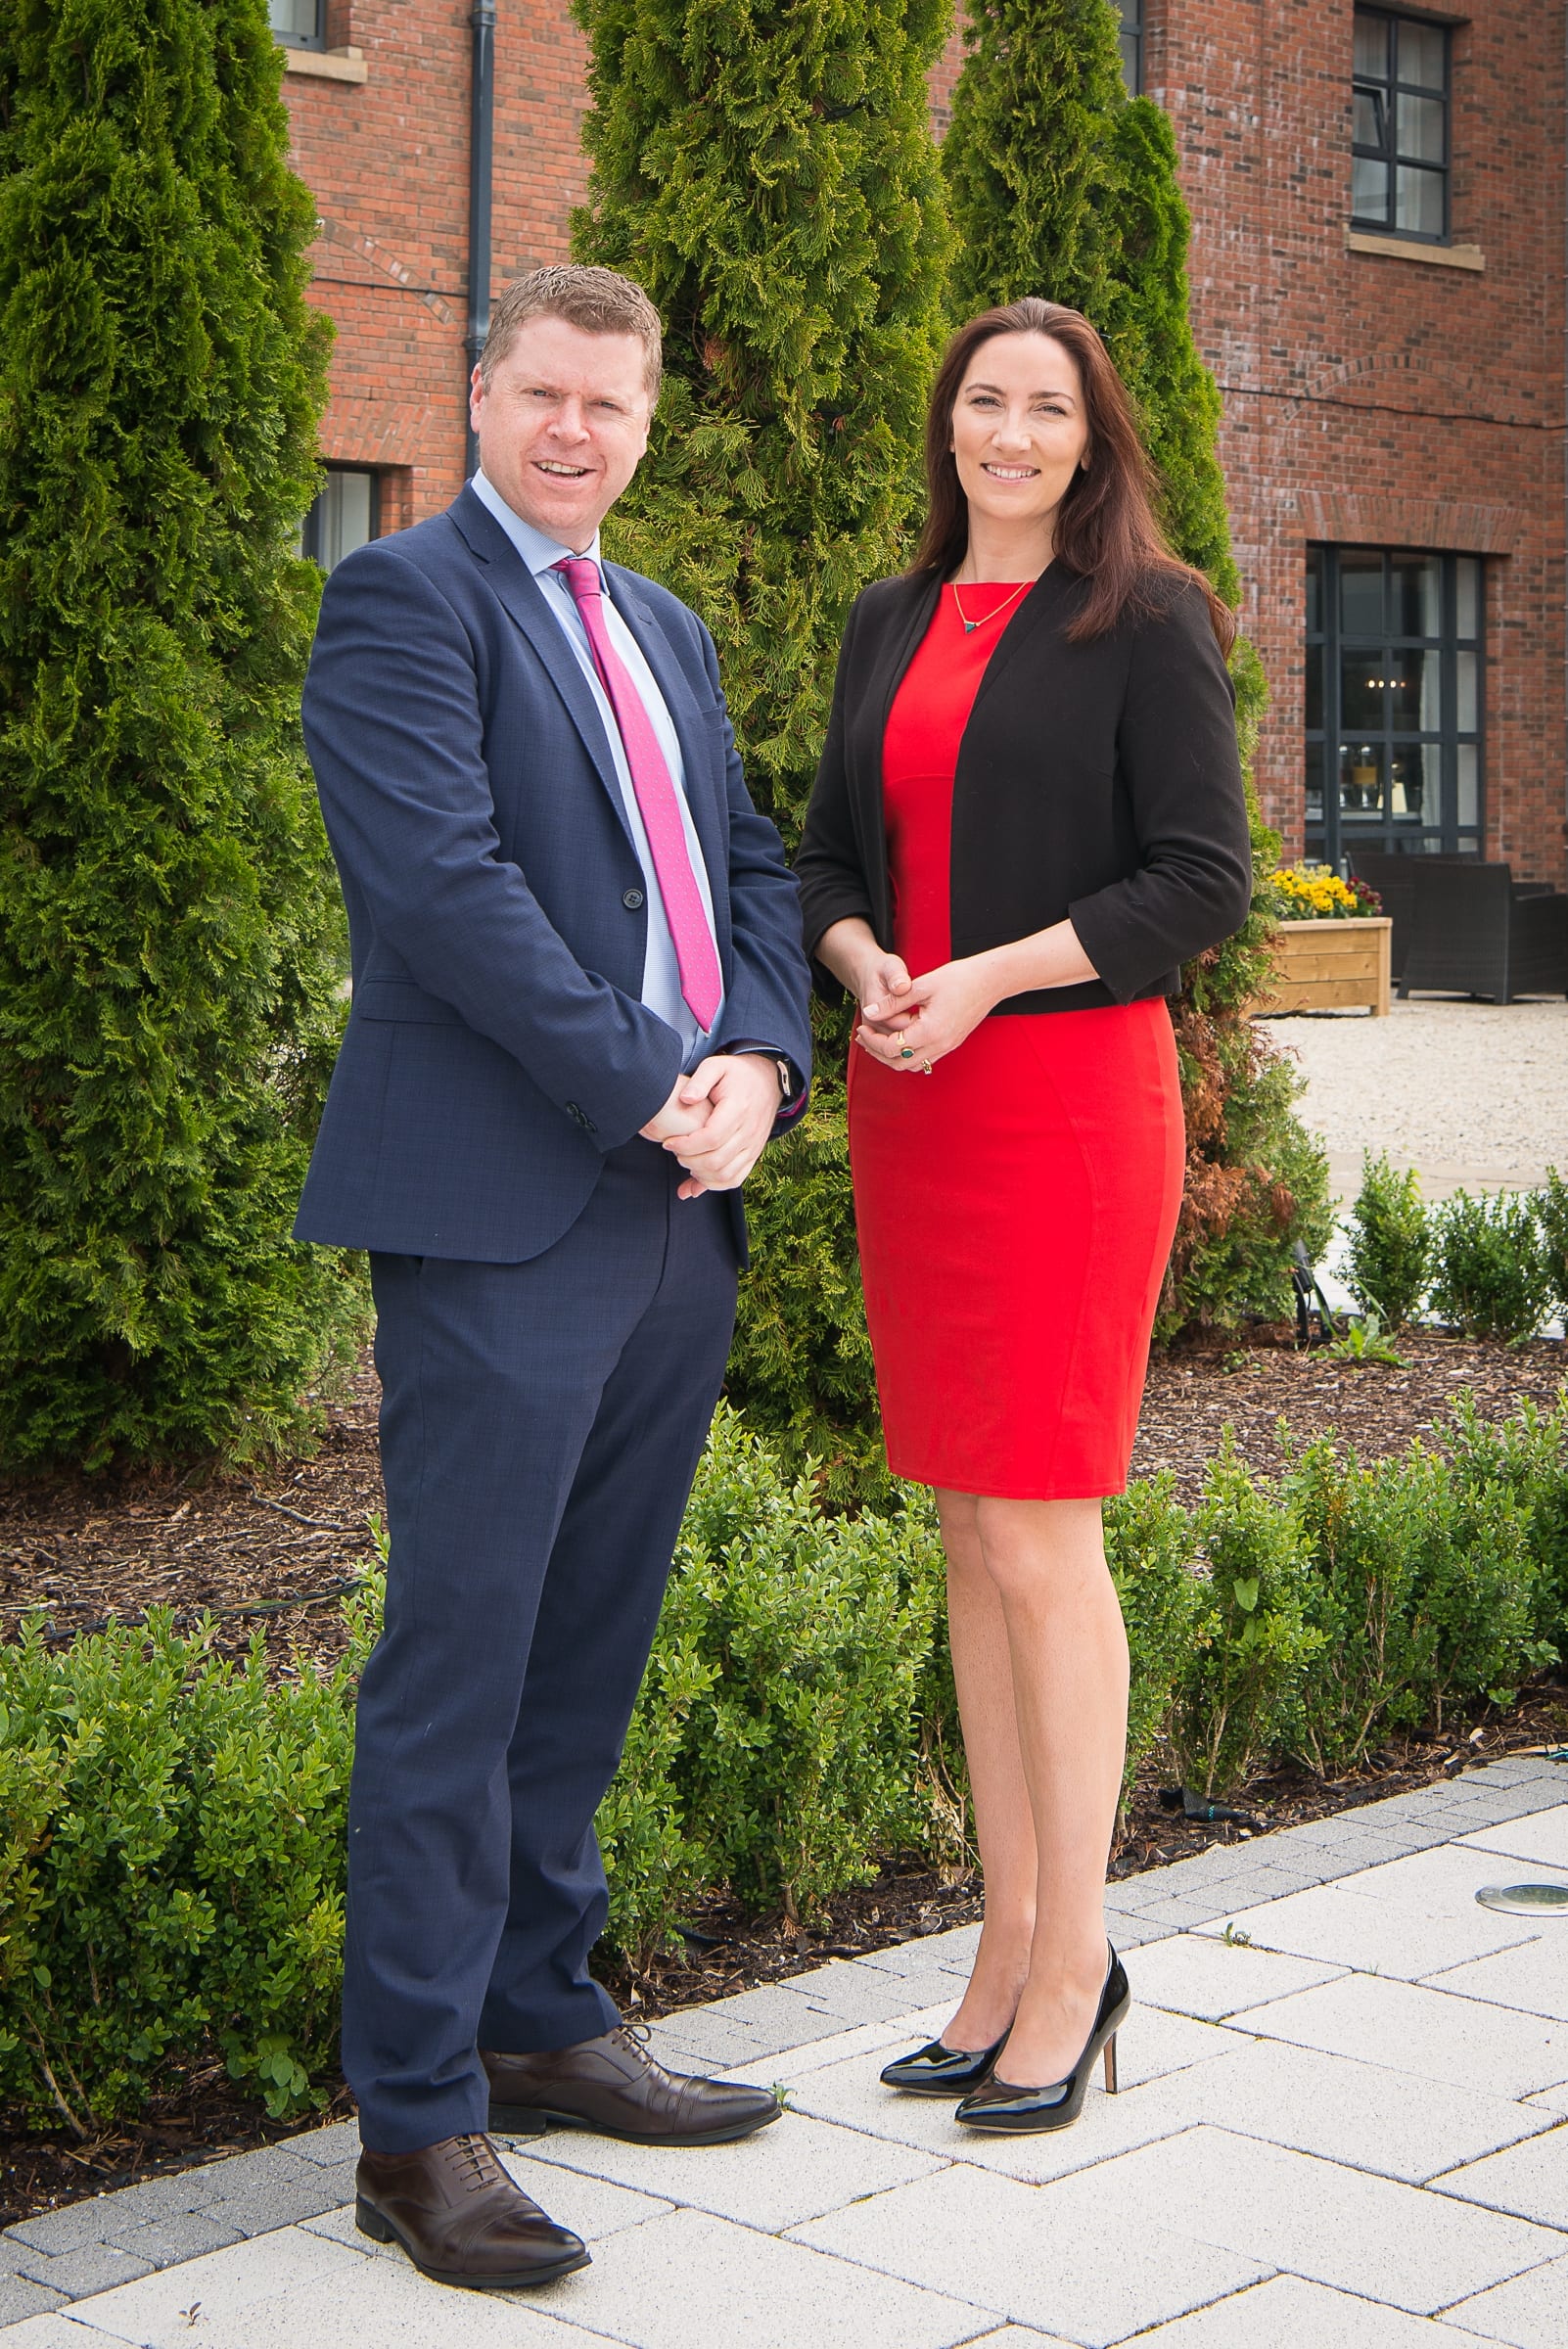 From Left to Right:  Launch of Limerick Chamber President Awards held in the Castletroy Park Hotel on 25th June 2019: Eoin Ryan - Limerick Chamber President / HLBMGR, Gillian Barry -  LIT
Photo by Morning Star Photography